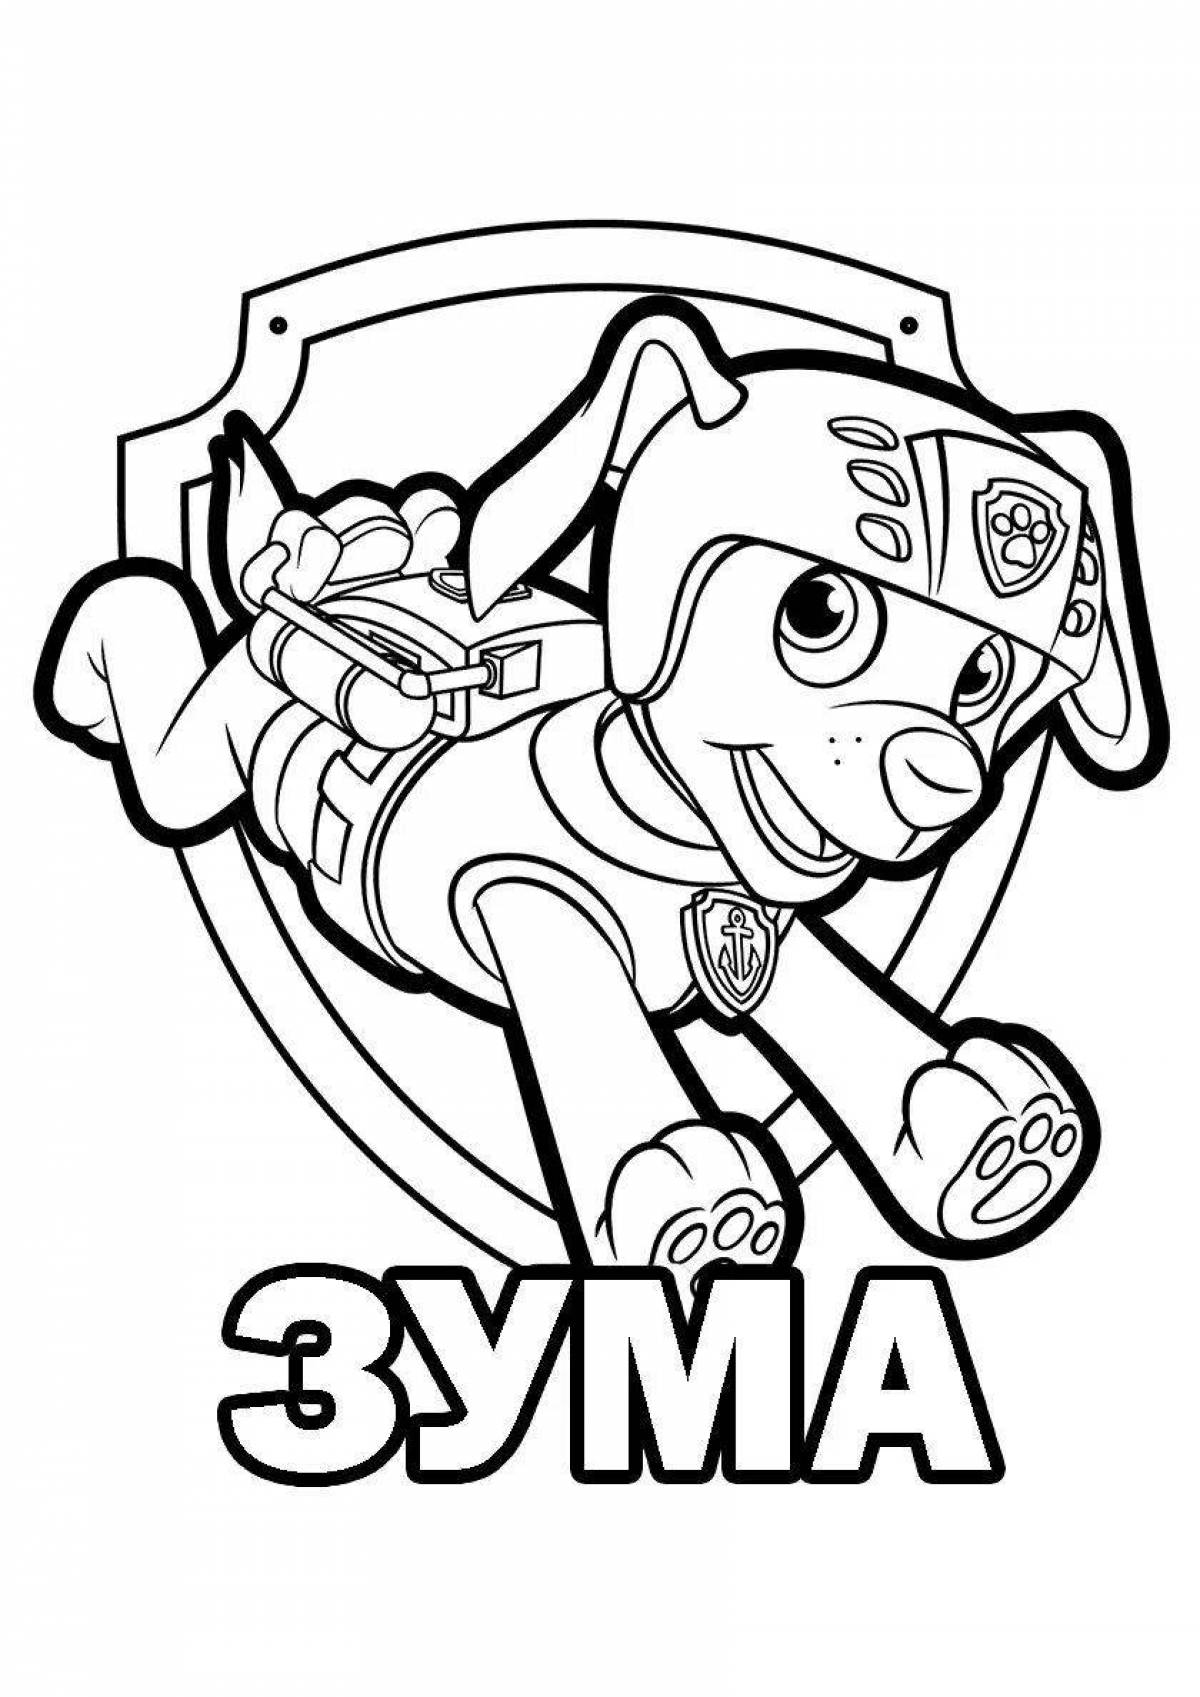 Animated coloring page paw patrol rex